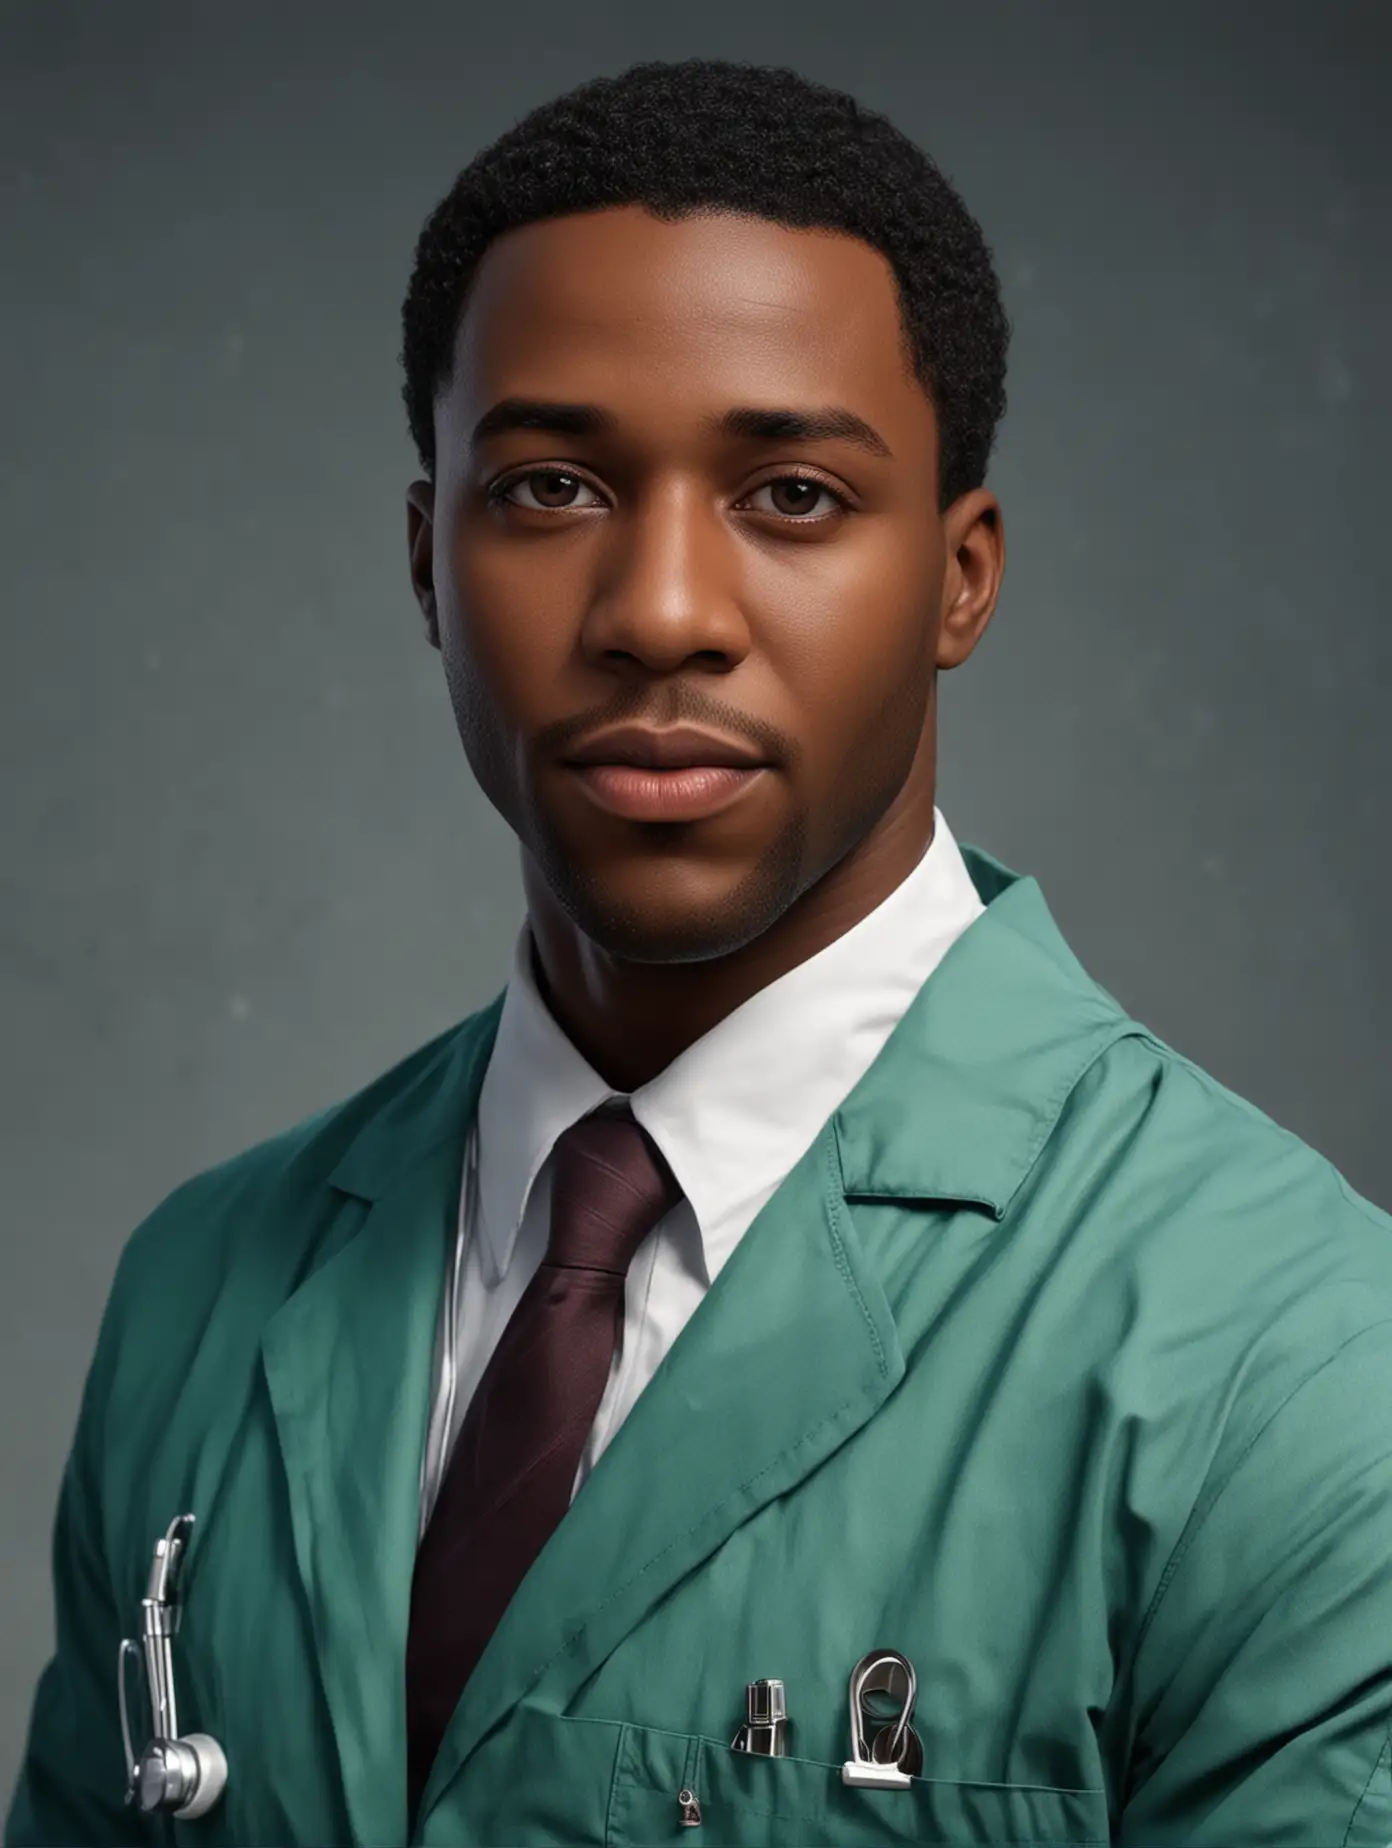 Realistic-Black-Male-Medical-Specialist-in-Hospital-Setting